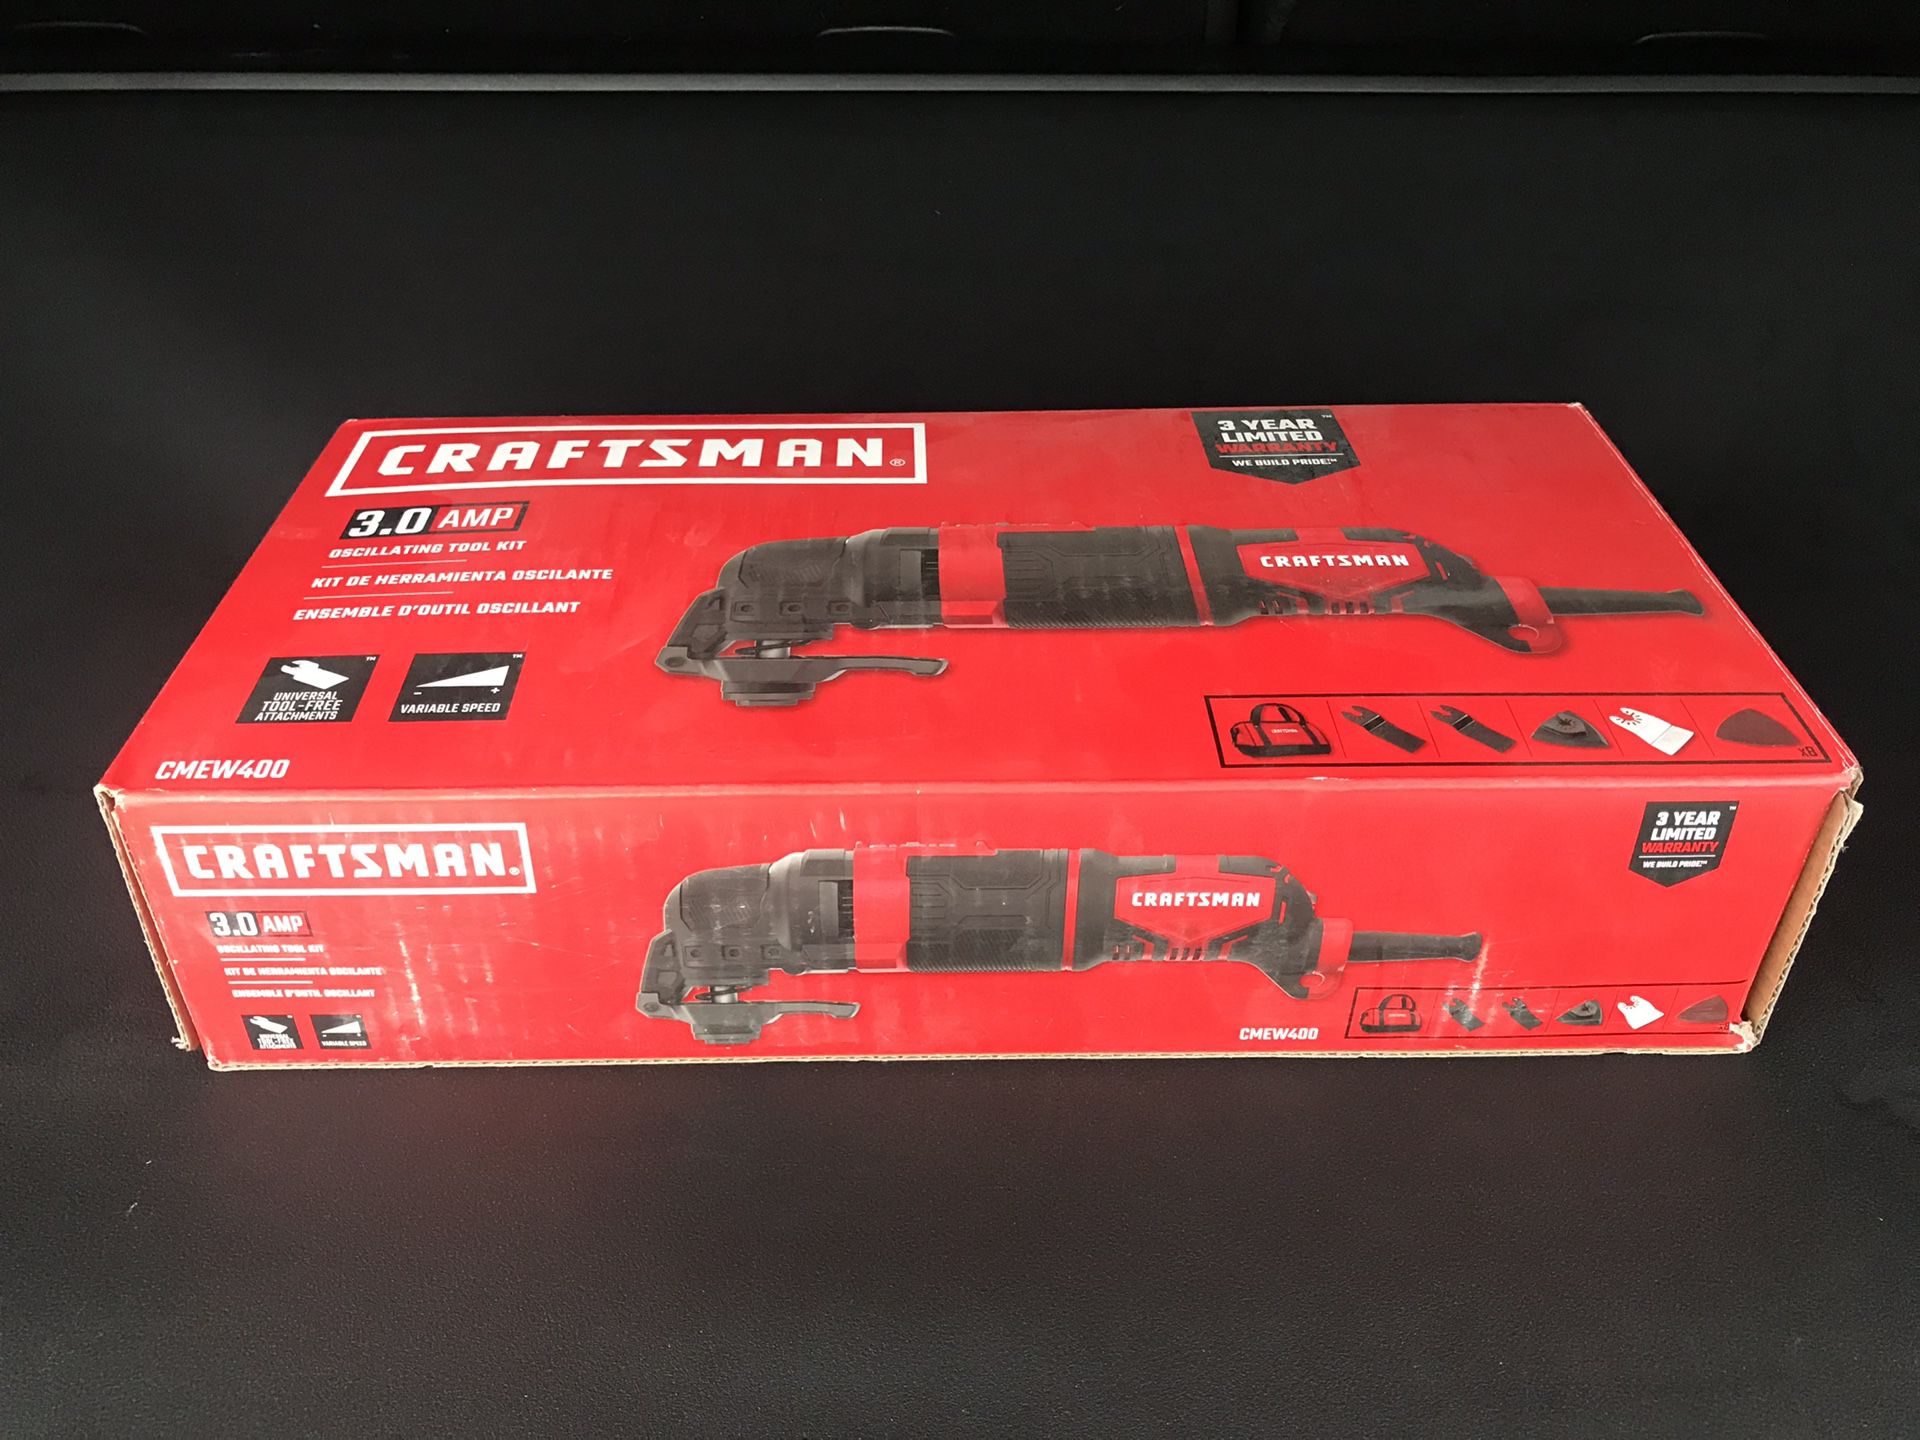 CRAFTSMAN 14-Piece Corded 3-Amp Variable Speed Oscillating Multi-Tool Kit with Soft Case